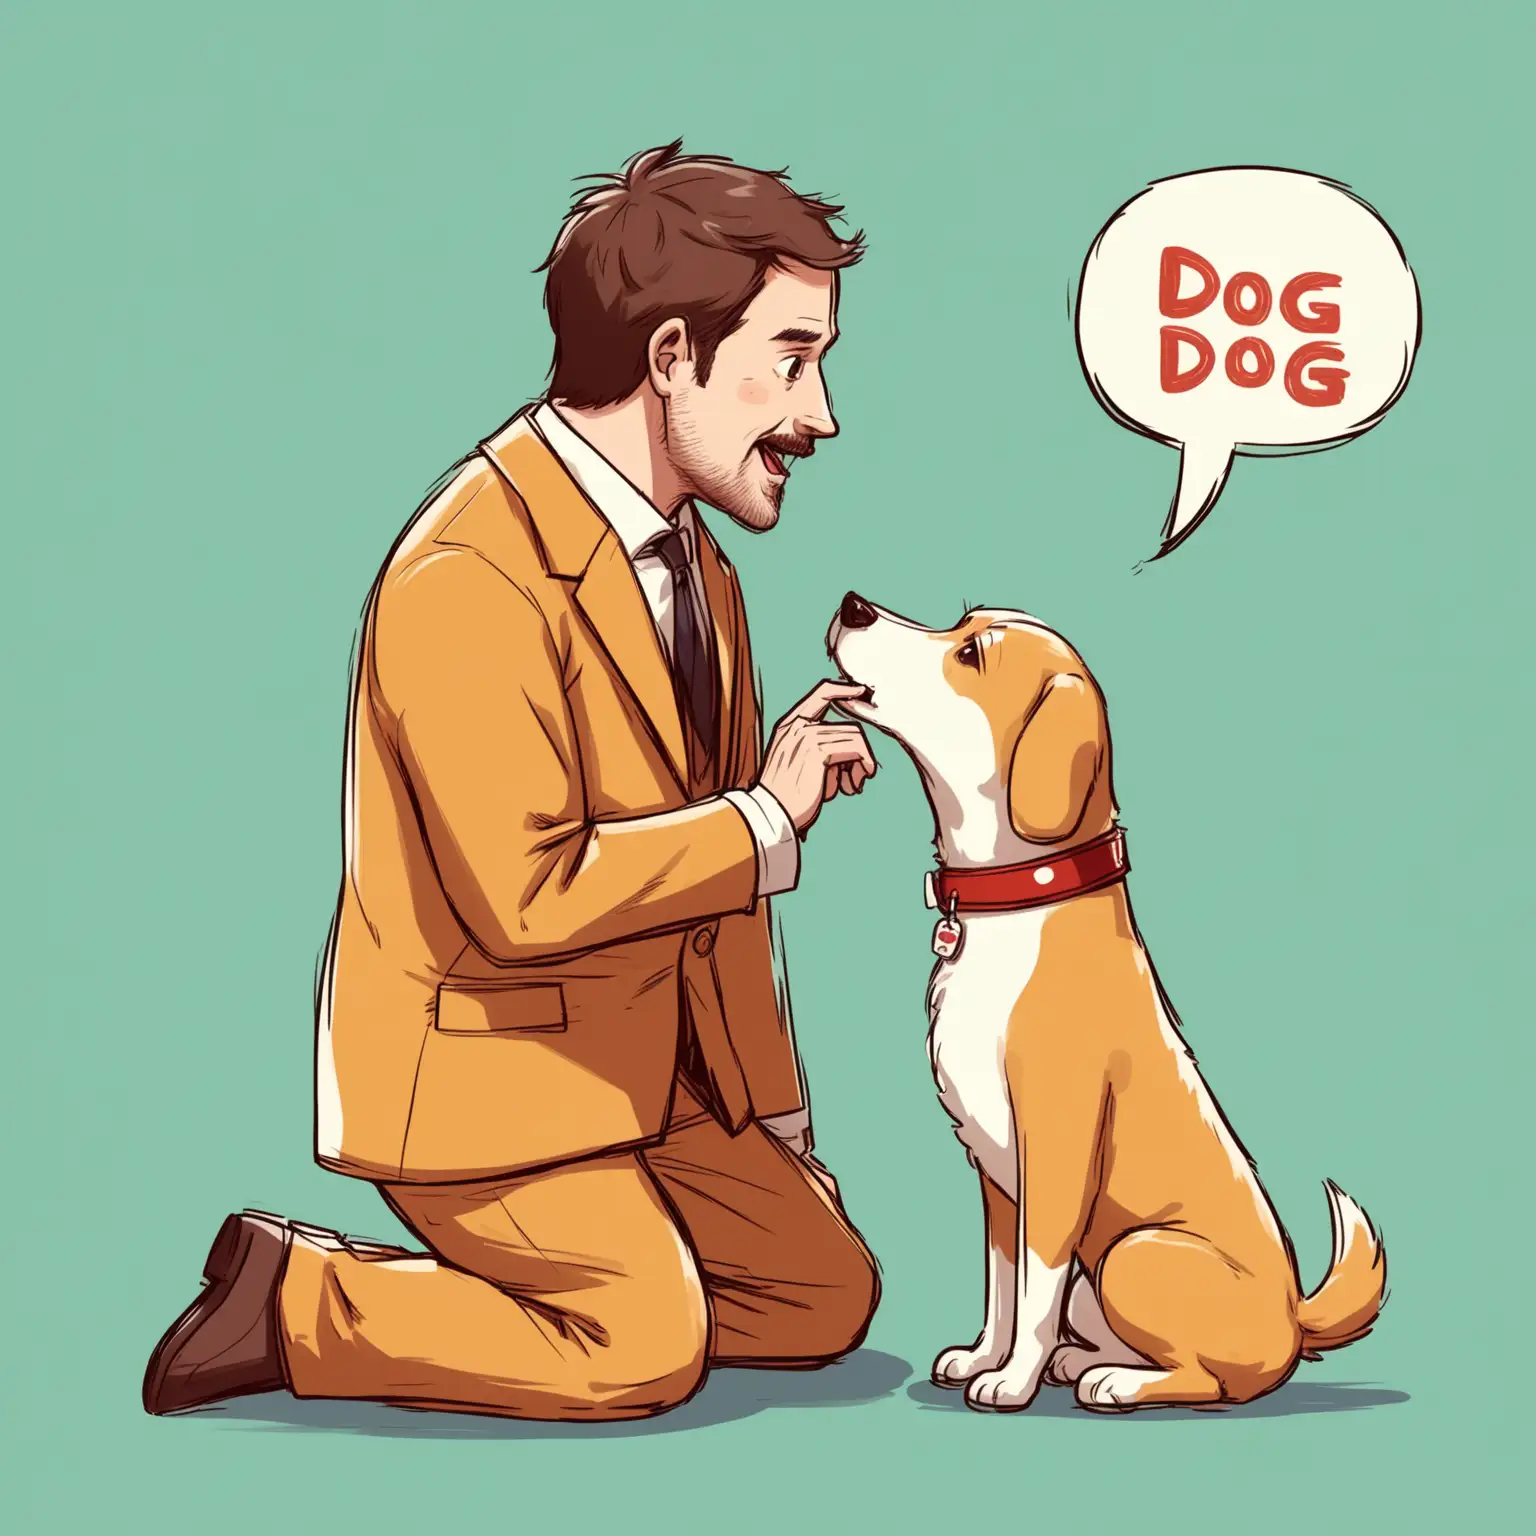 cute illustration of a man dressed as a dog, talking to an actual dog